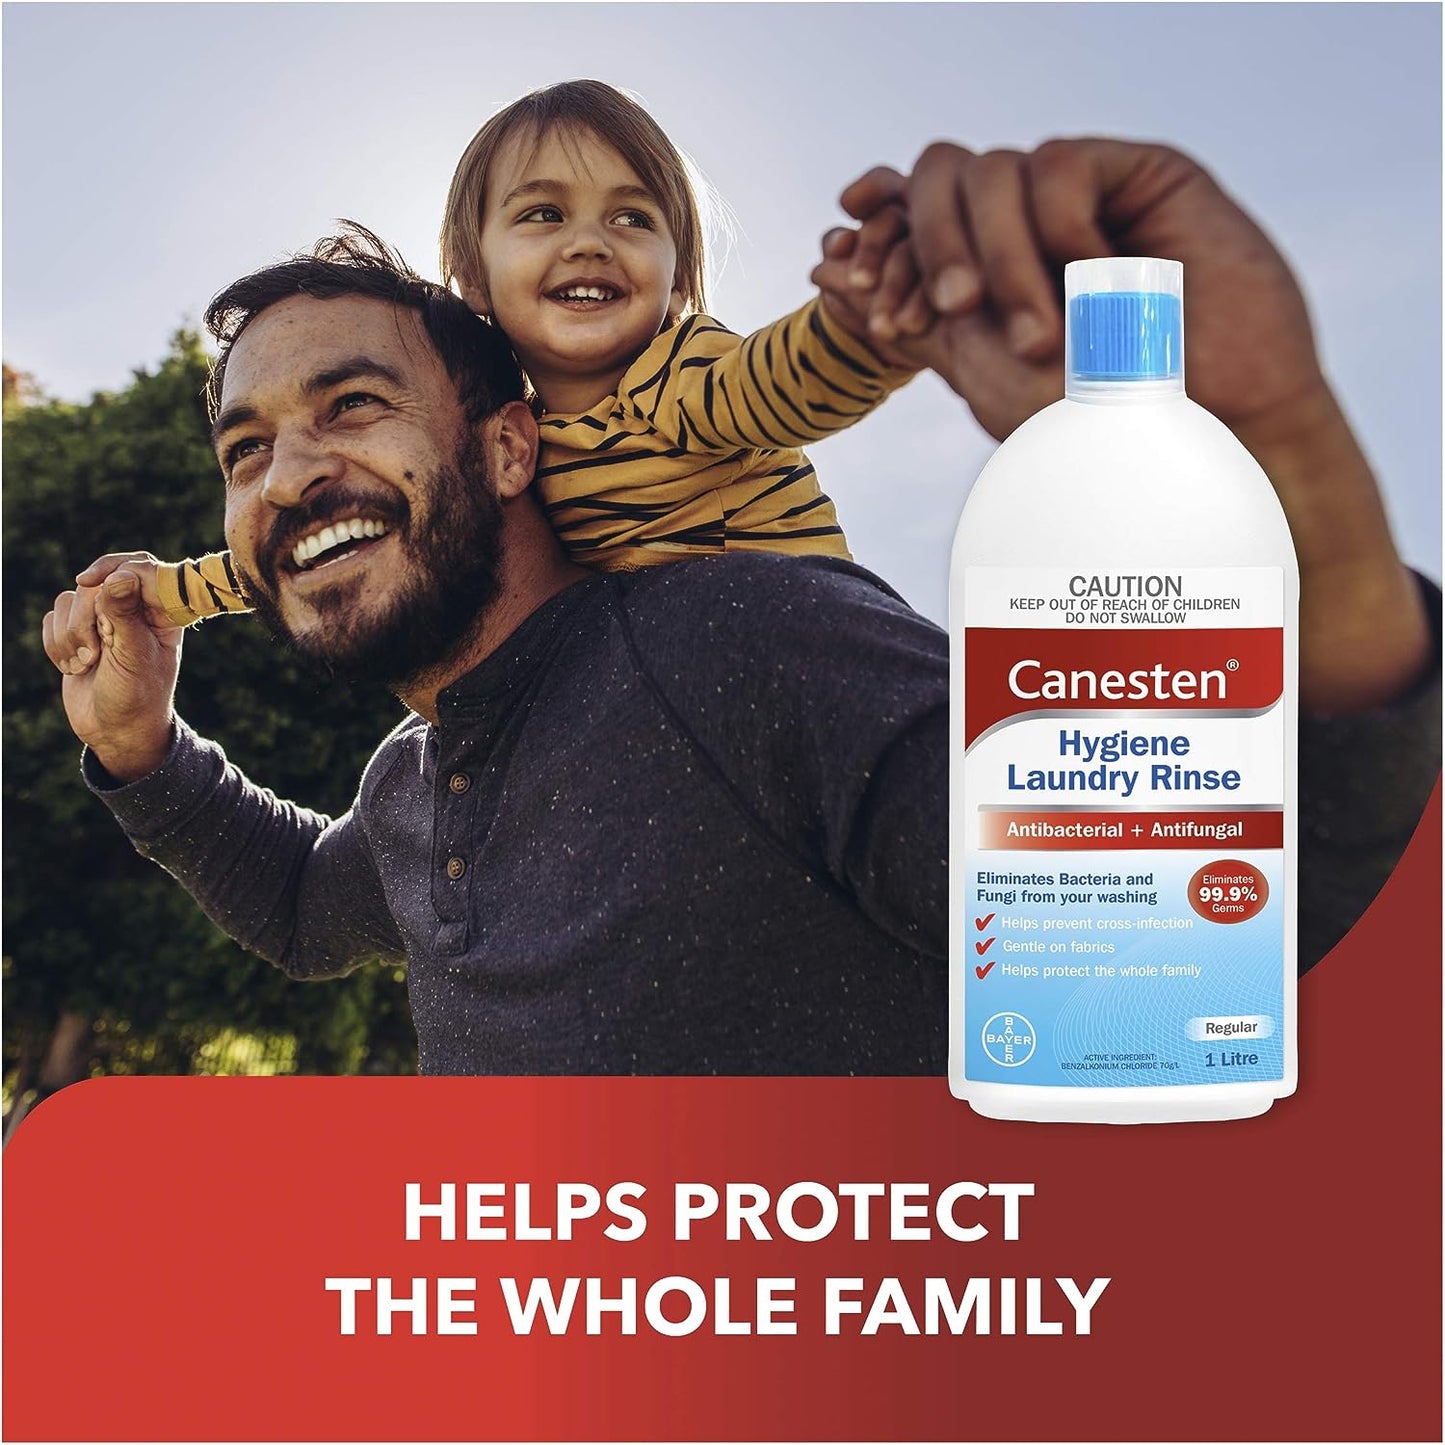 Canesten Antibacterial and Antifungal Hygiene Laundry Rinse, Eliminates Bacteria and Fungi from Your Washing, 1 Ltr